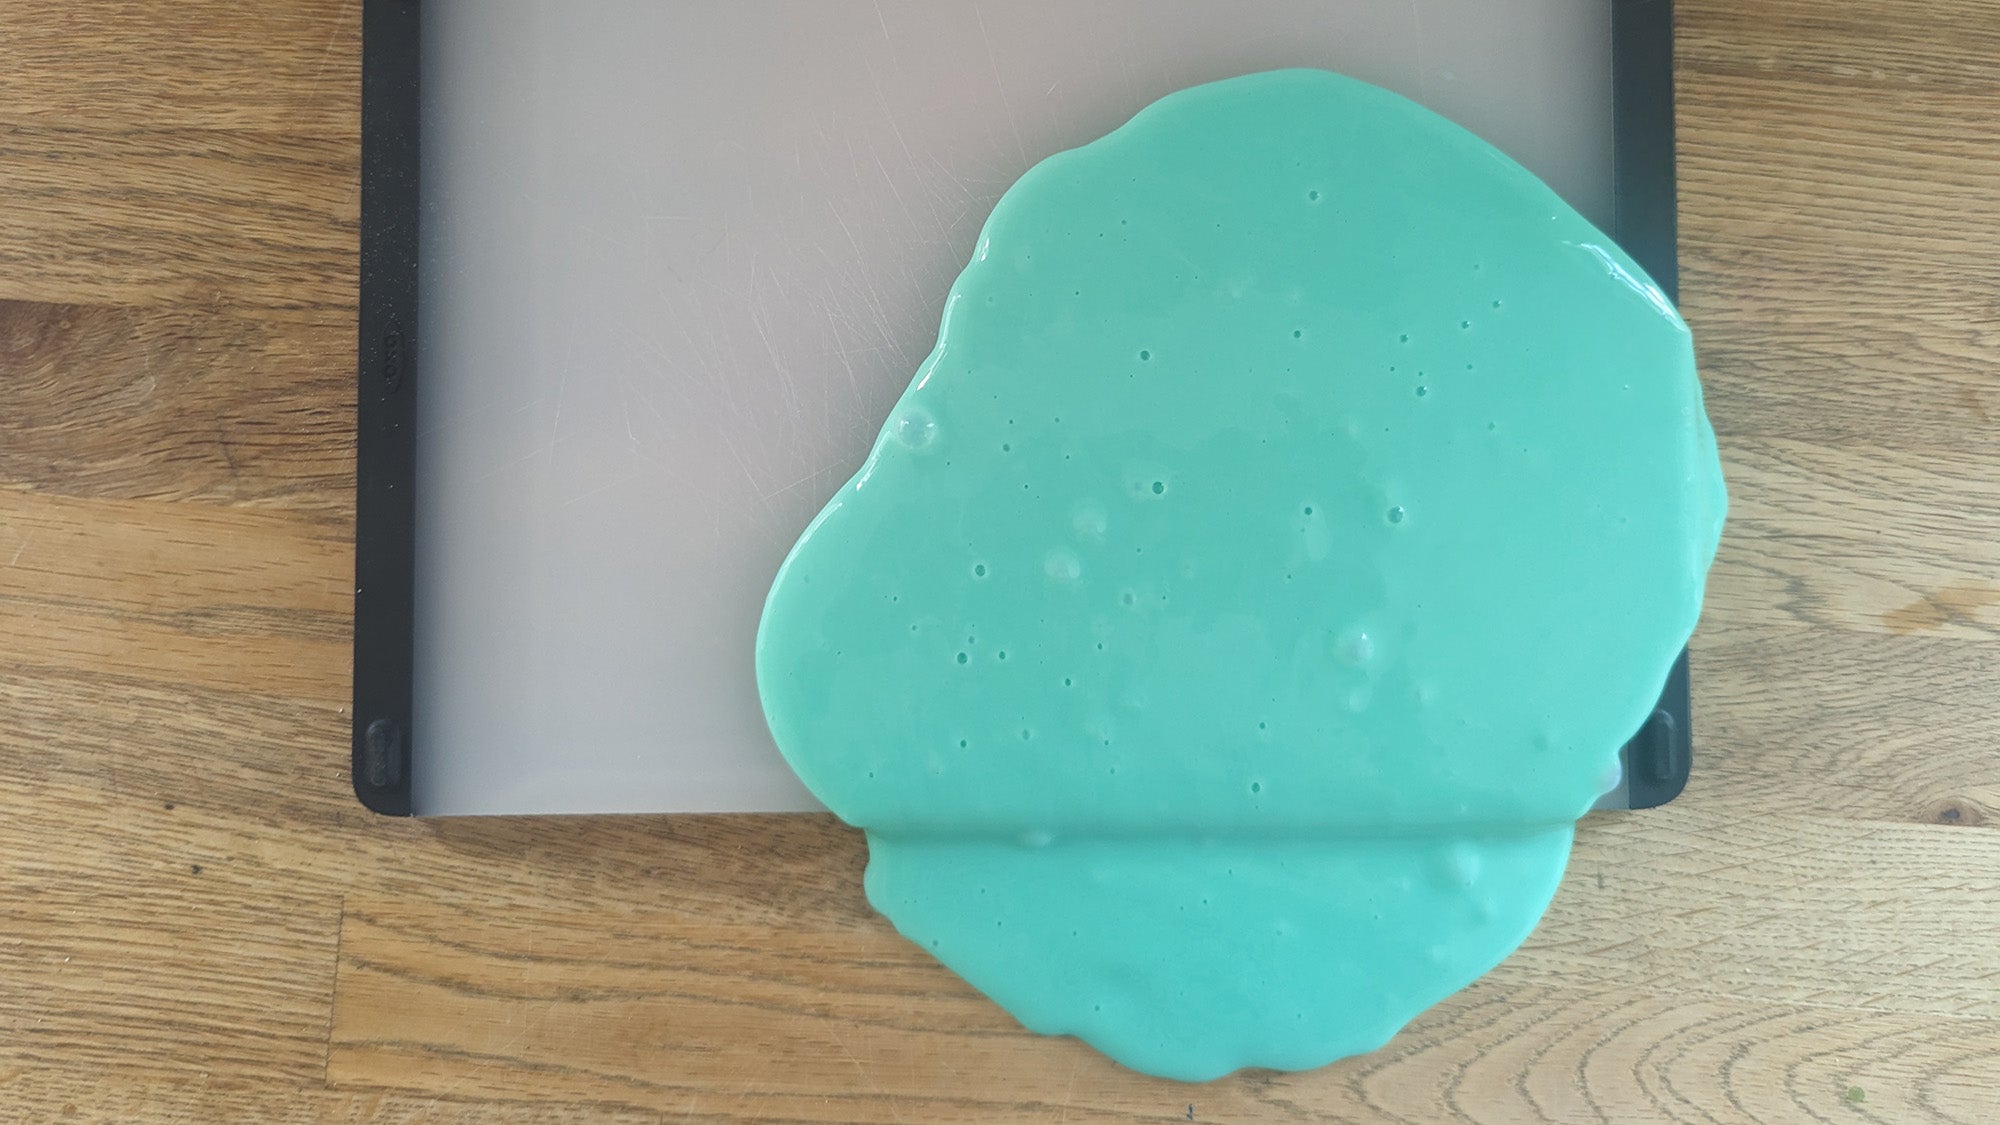 This is one of easiest ways how to make No Glue Slime!! Make sure